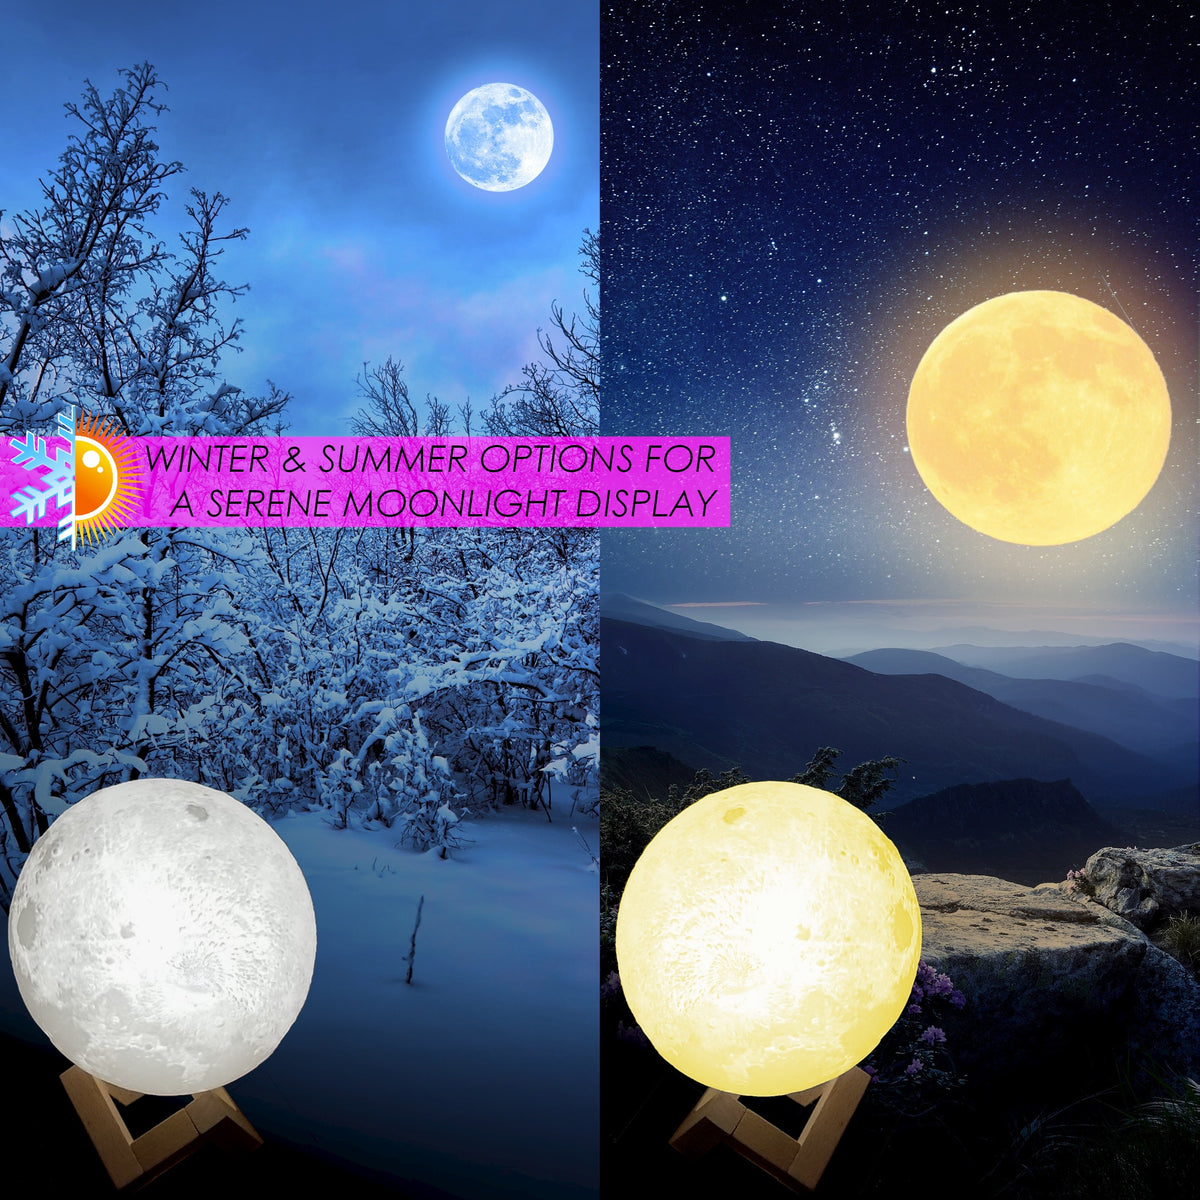 Details about   3D Printing Moon Lamp Moonlight USB LED Night Lunar Light Touch 2020 Hot 